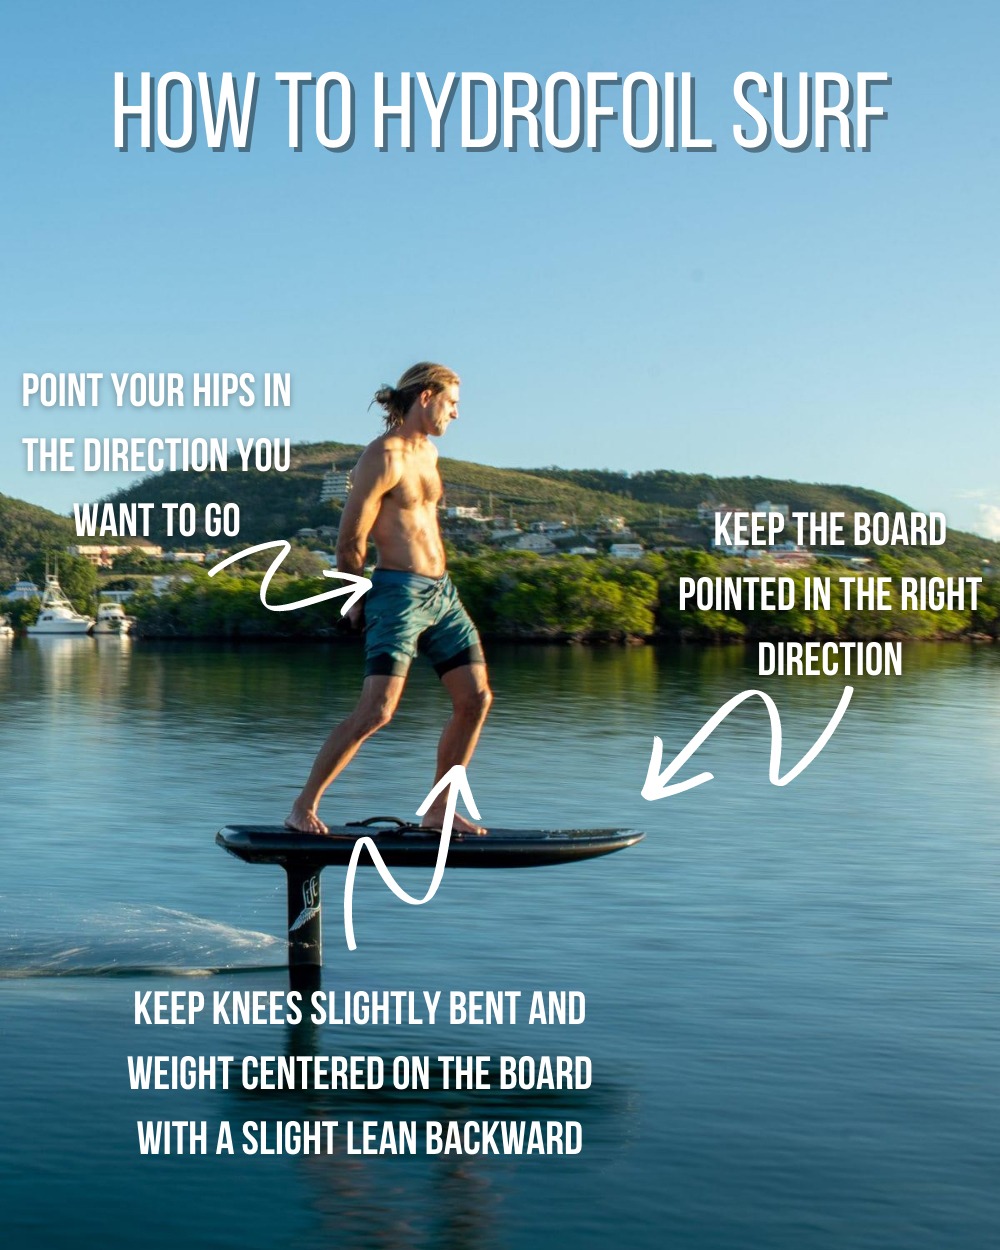 how to hydrofoil surf